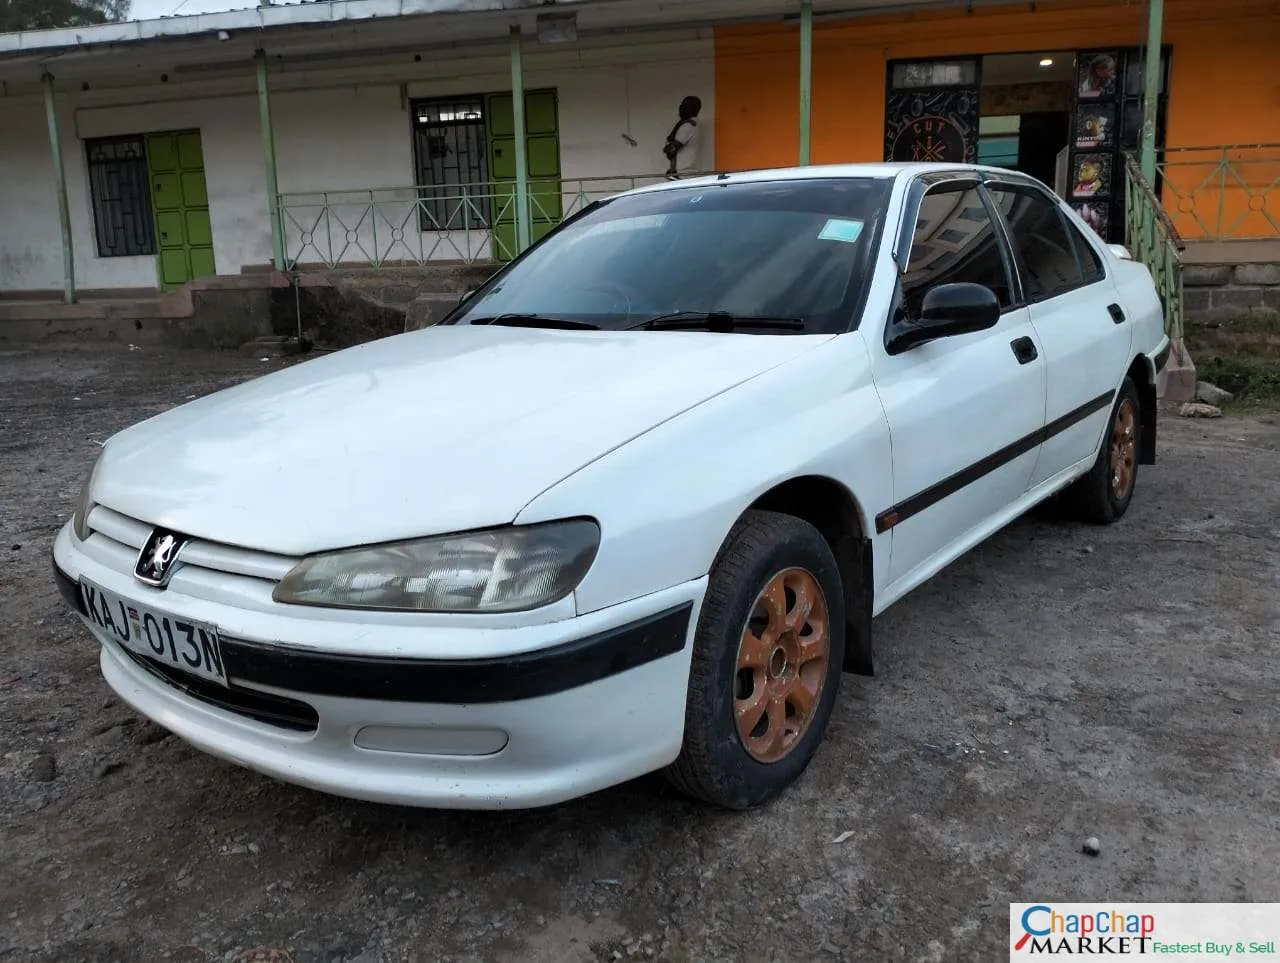 Cars Cars For Sale-Peugeot 406 250K ONLY Cheapest You ONLY Pay 30% Deposit Trade in Ok Wow! PEUGEOT for sale on Kenya hire purchase installments peugeot kenya 6